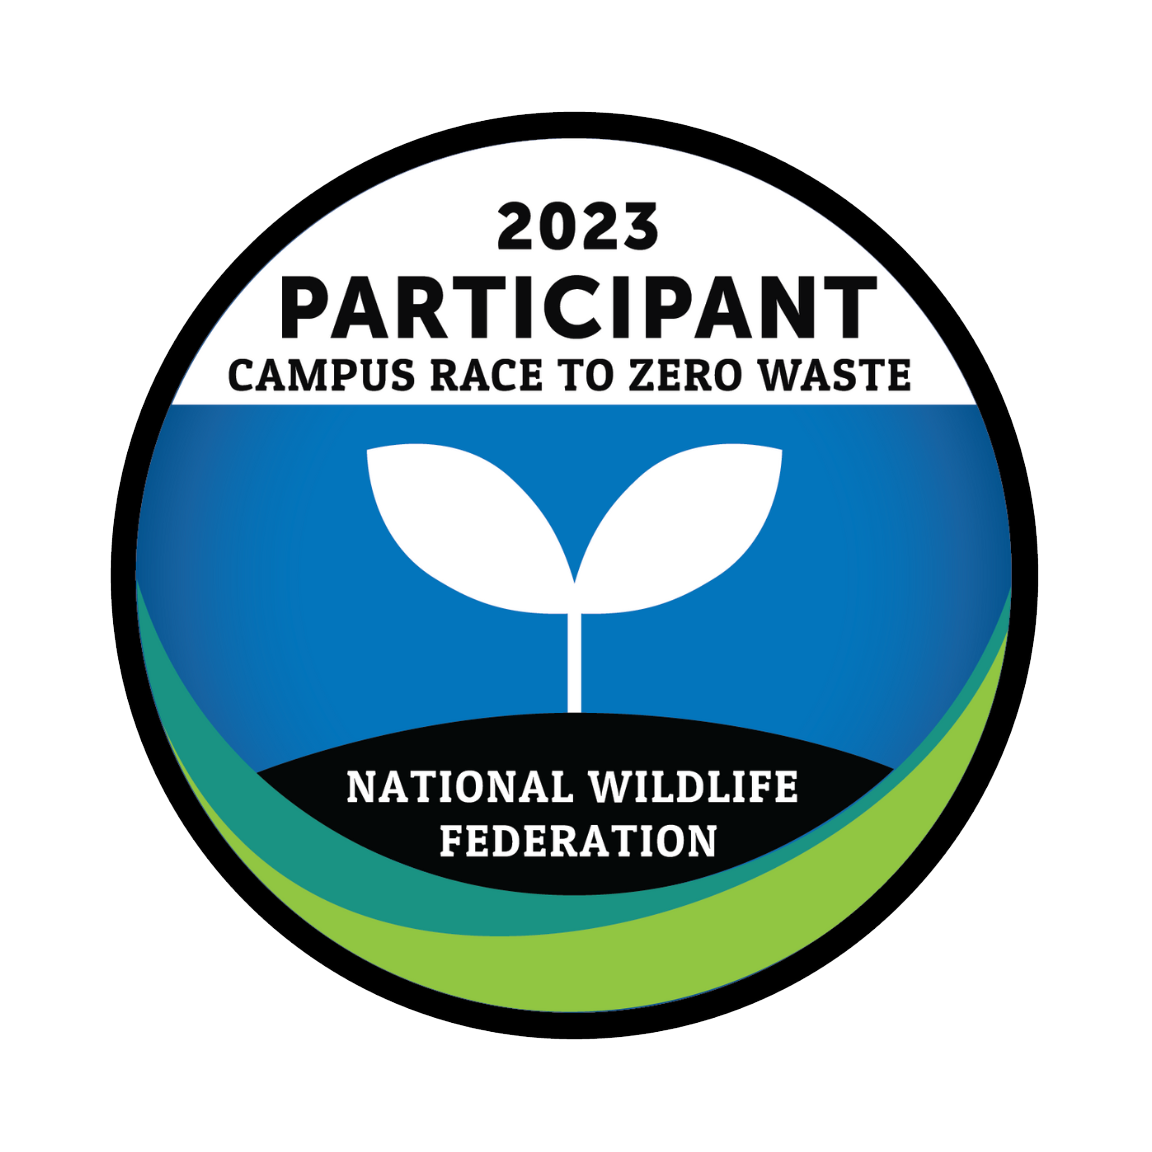 2023 Participant in the National Wildlife Federation's Campus Race to Zero Waste